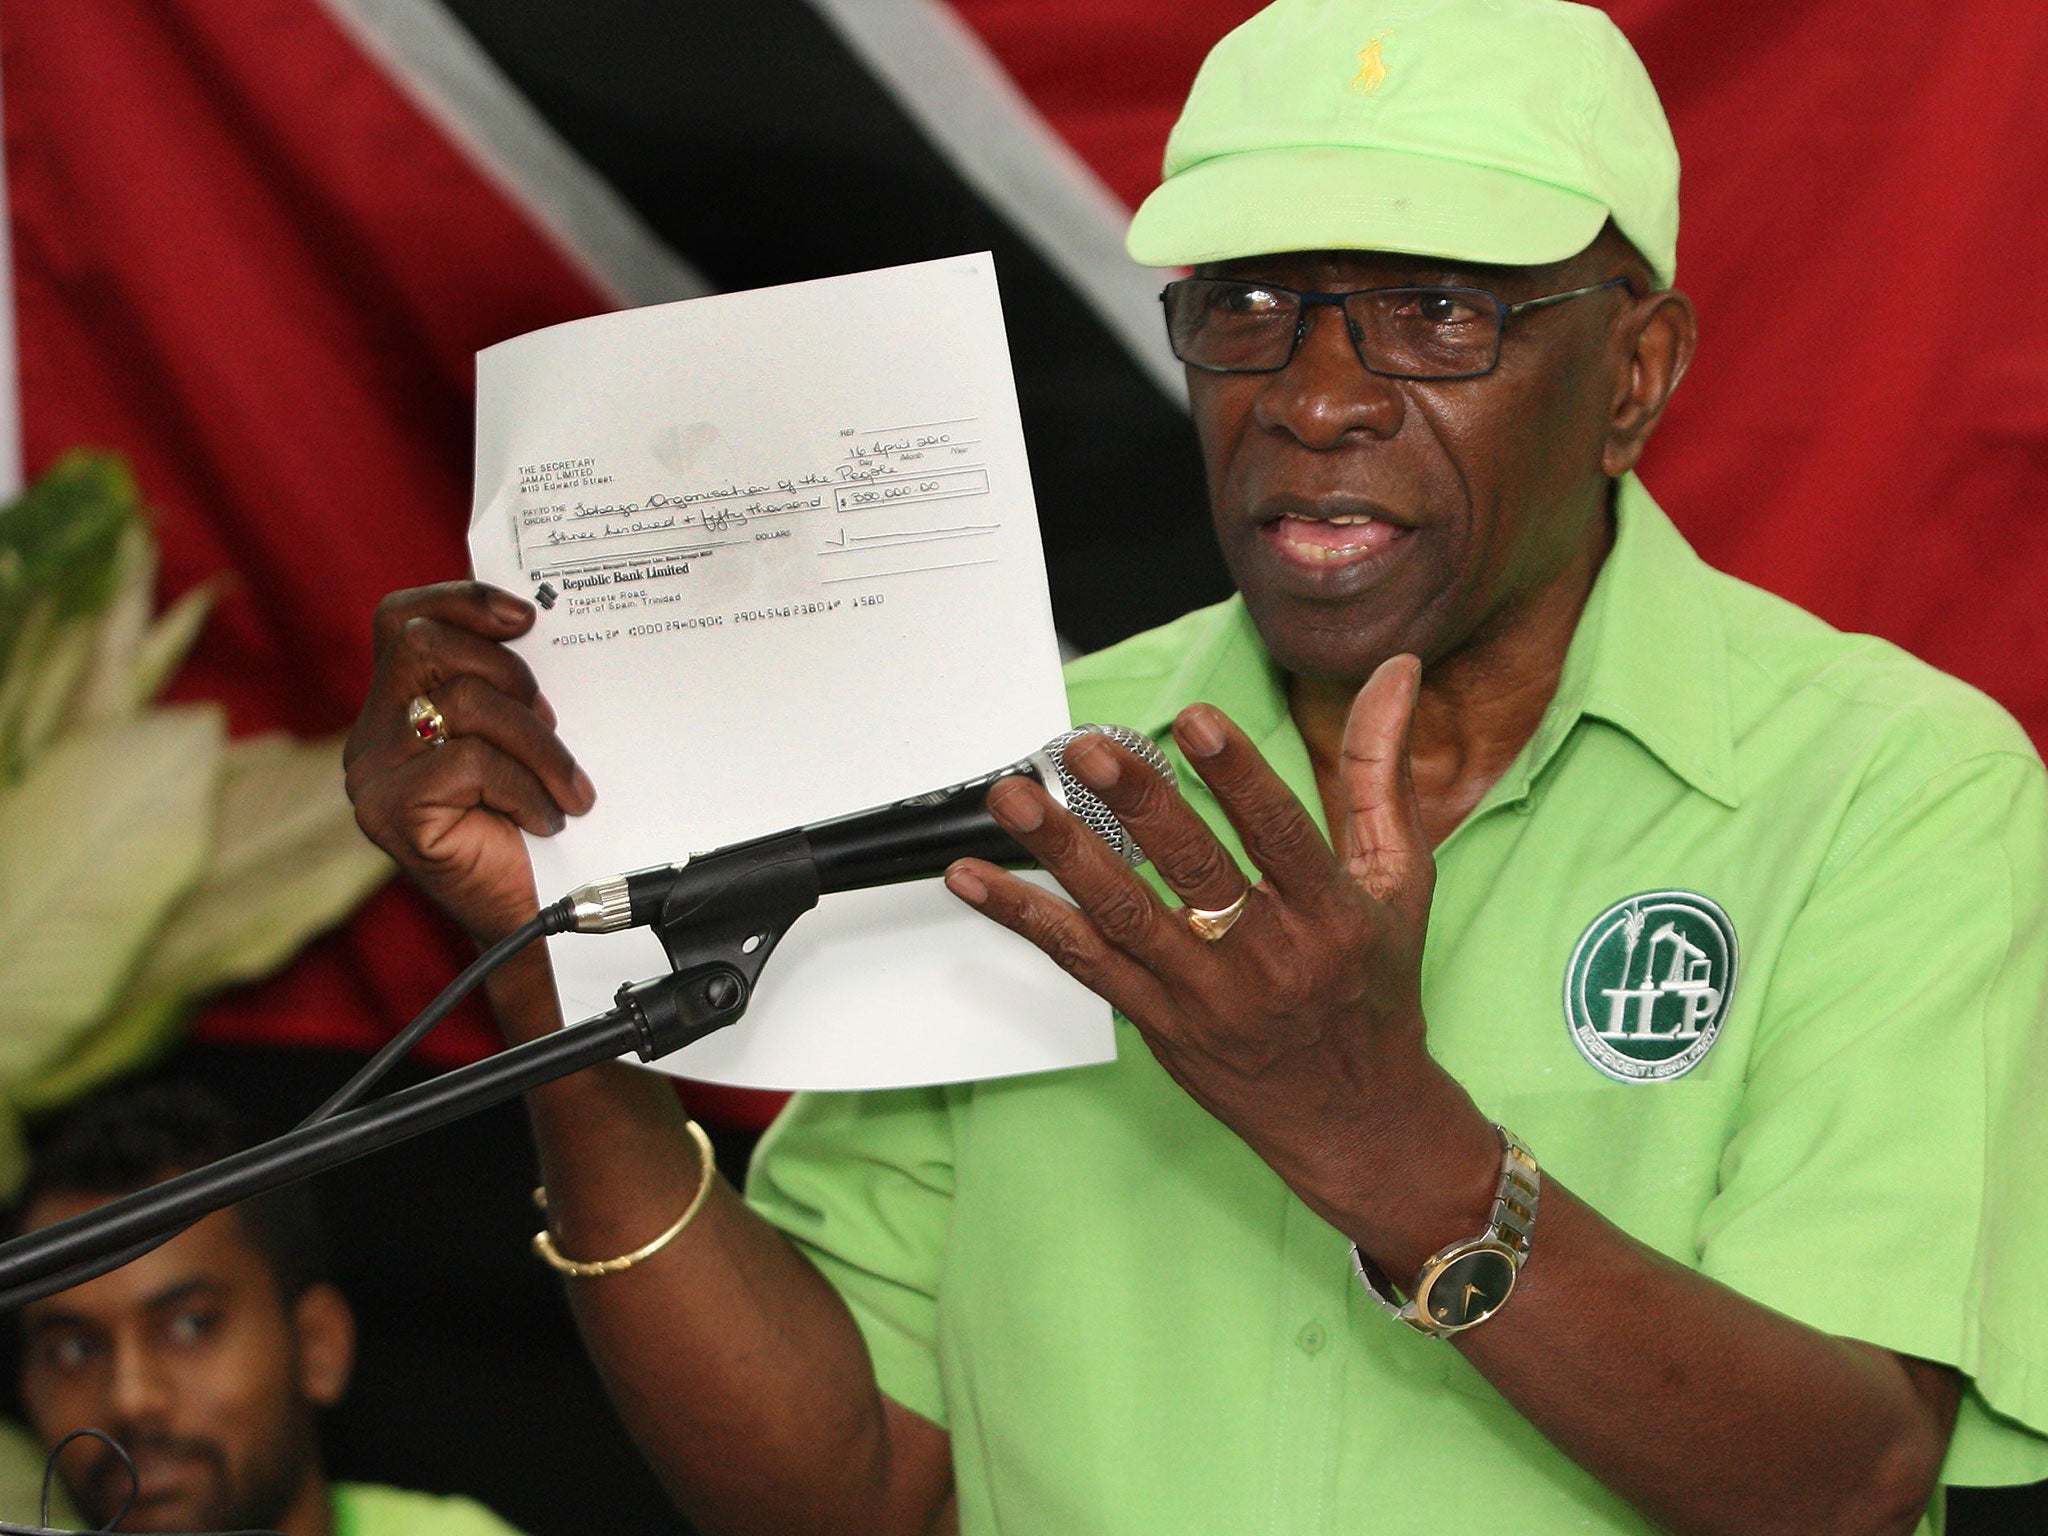 Former FIFA vice president Jack Warner hold a copy of a cheque while he speaks at a political rally in Marabella, Trinidad and Tobago, on Wednesday, 3 June 2015